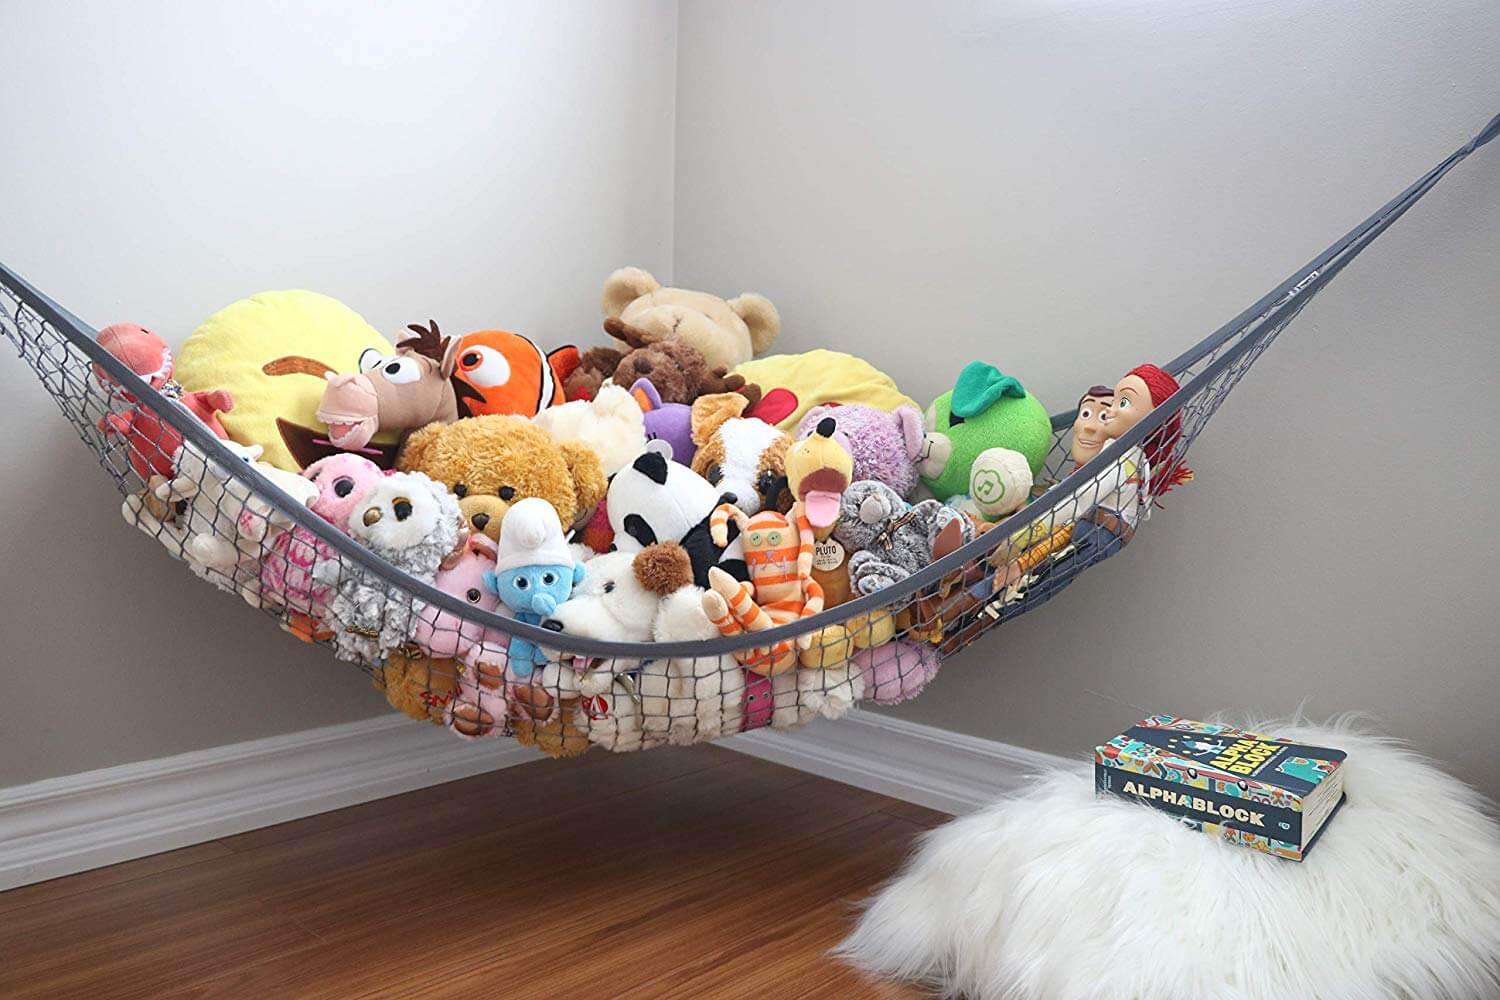 Rainbow, X-Large Comes in a Gift Box. Organizational Stuffed Animal Net for Play Room or Bedroom MiniOwls Toy Storage Hammock Fits 30-40 Plushies 